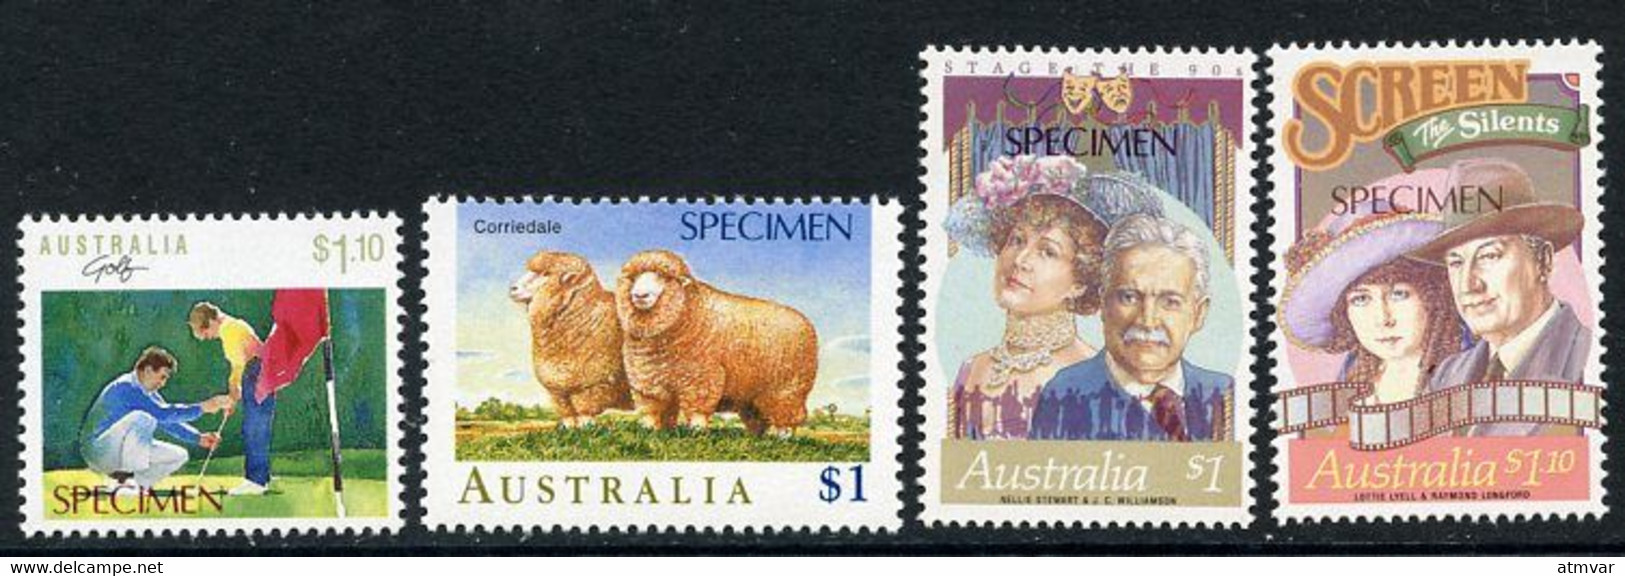 AUSTRALIA SPECIMEN Stamps - Golf, Sheep Corriedale, Cinema, Film, Theater, The Silents, Stage The 90s - Cinderellas